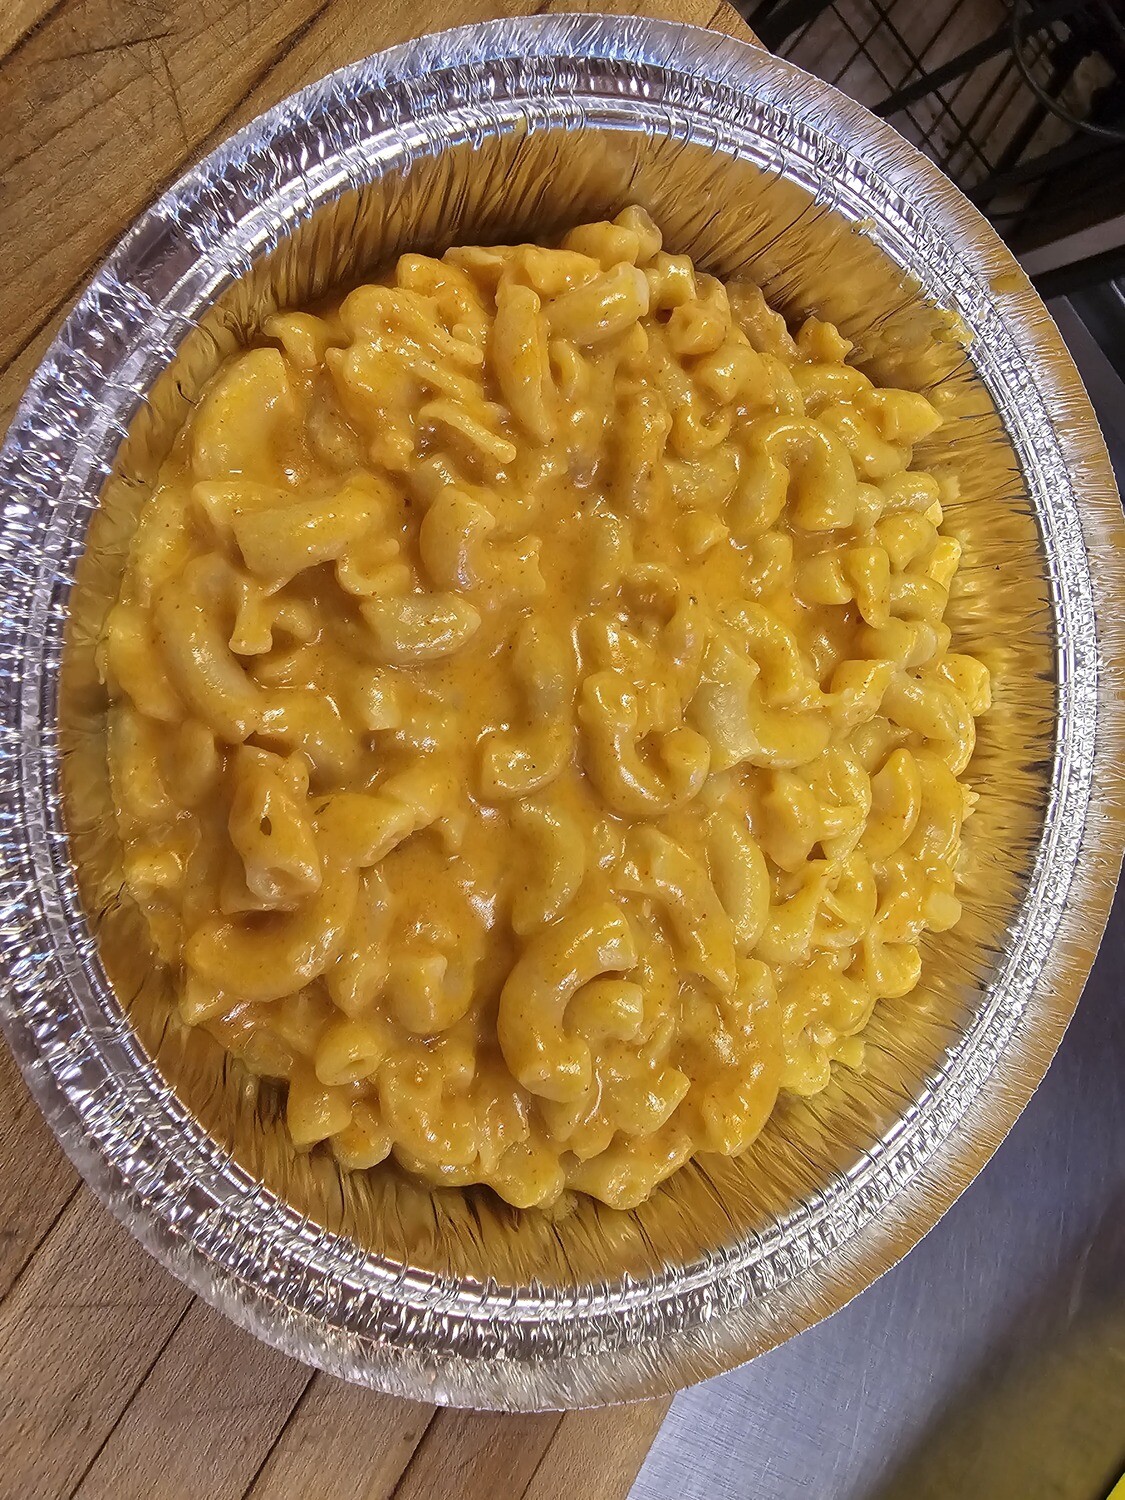 PARTY TRAY CHEDDAR MAC AND CHEESE - BESTSELLER!